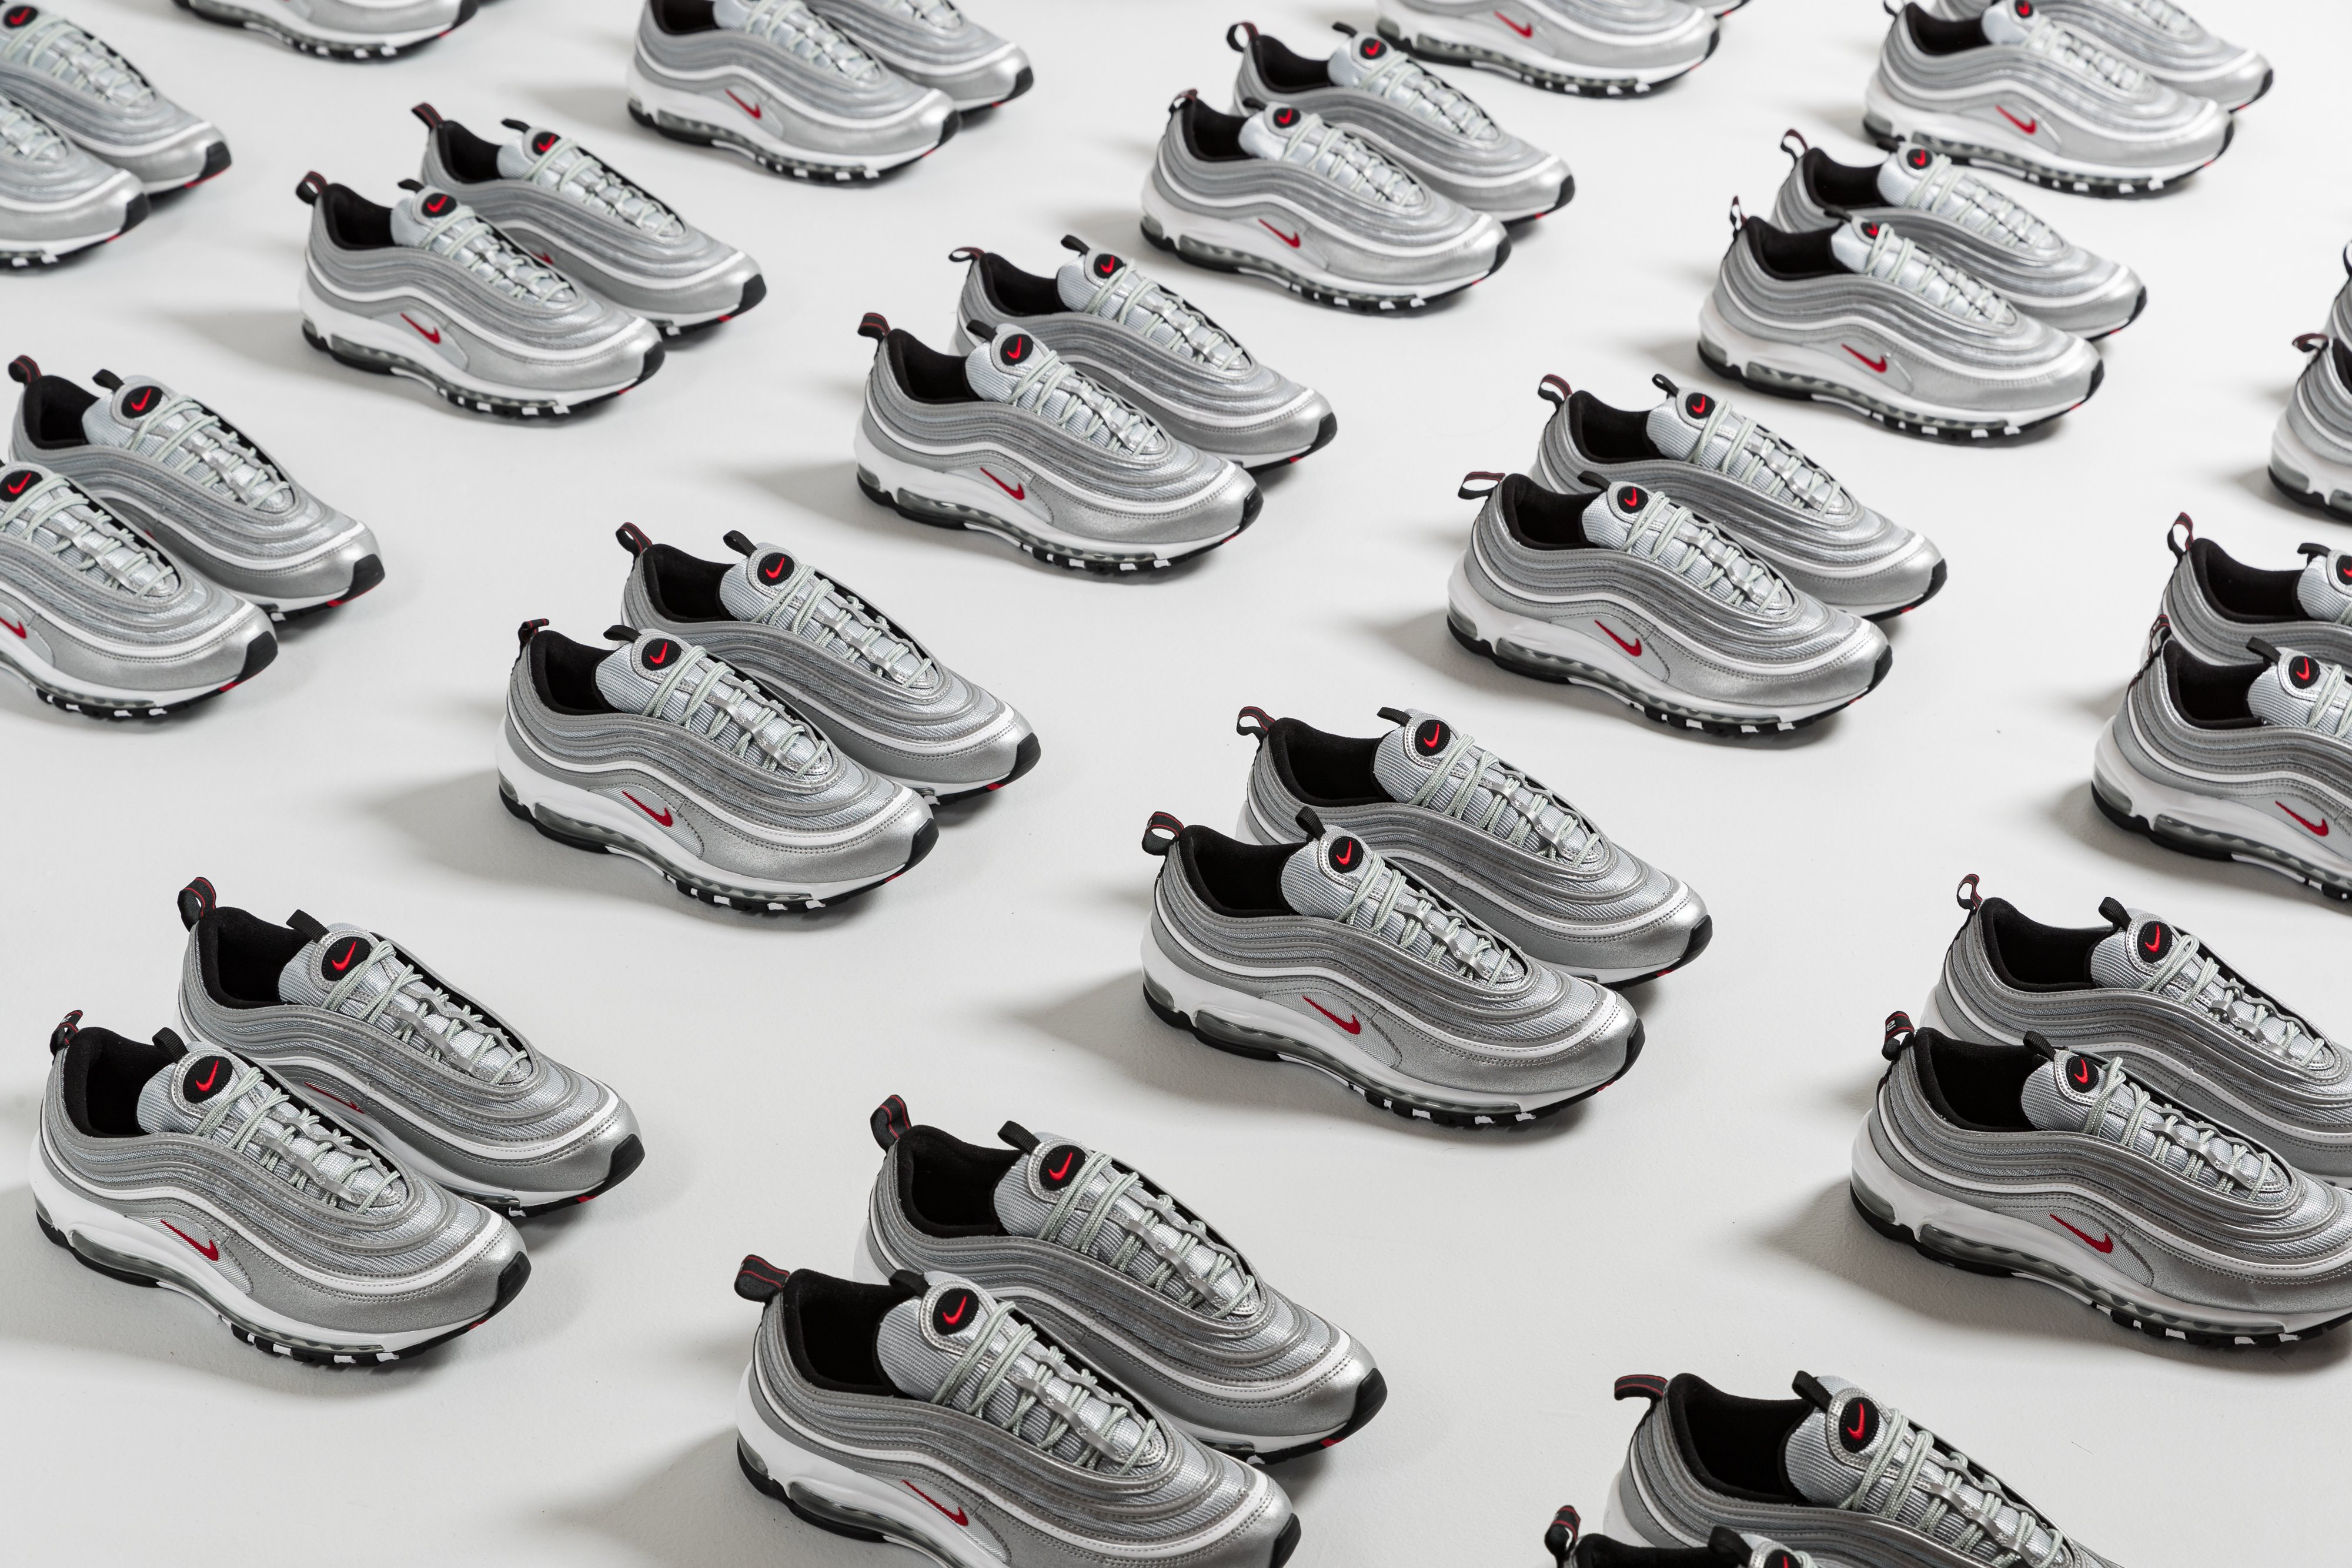 Repulsion Reassure reptiles 25 Years of the Future – Nike Air Max 97 | Up There Journal